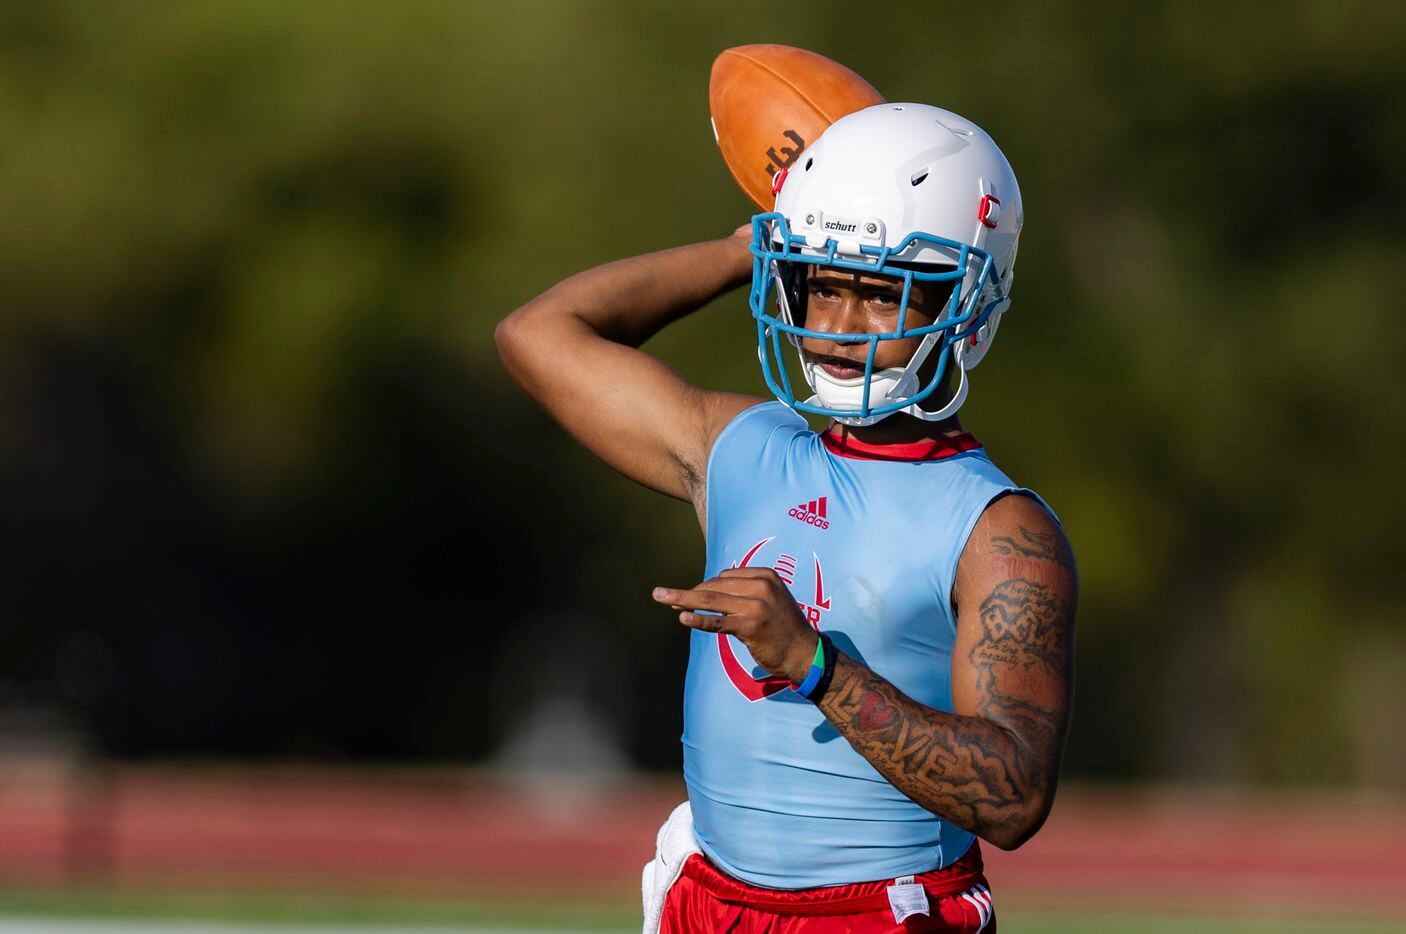 Carter junior quarterback Quaylon Robinson throws during the first practice of the season at...